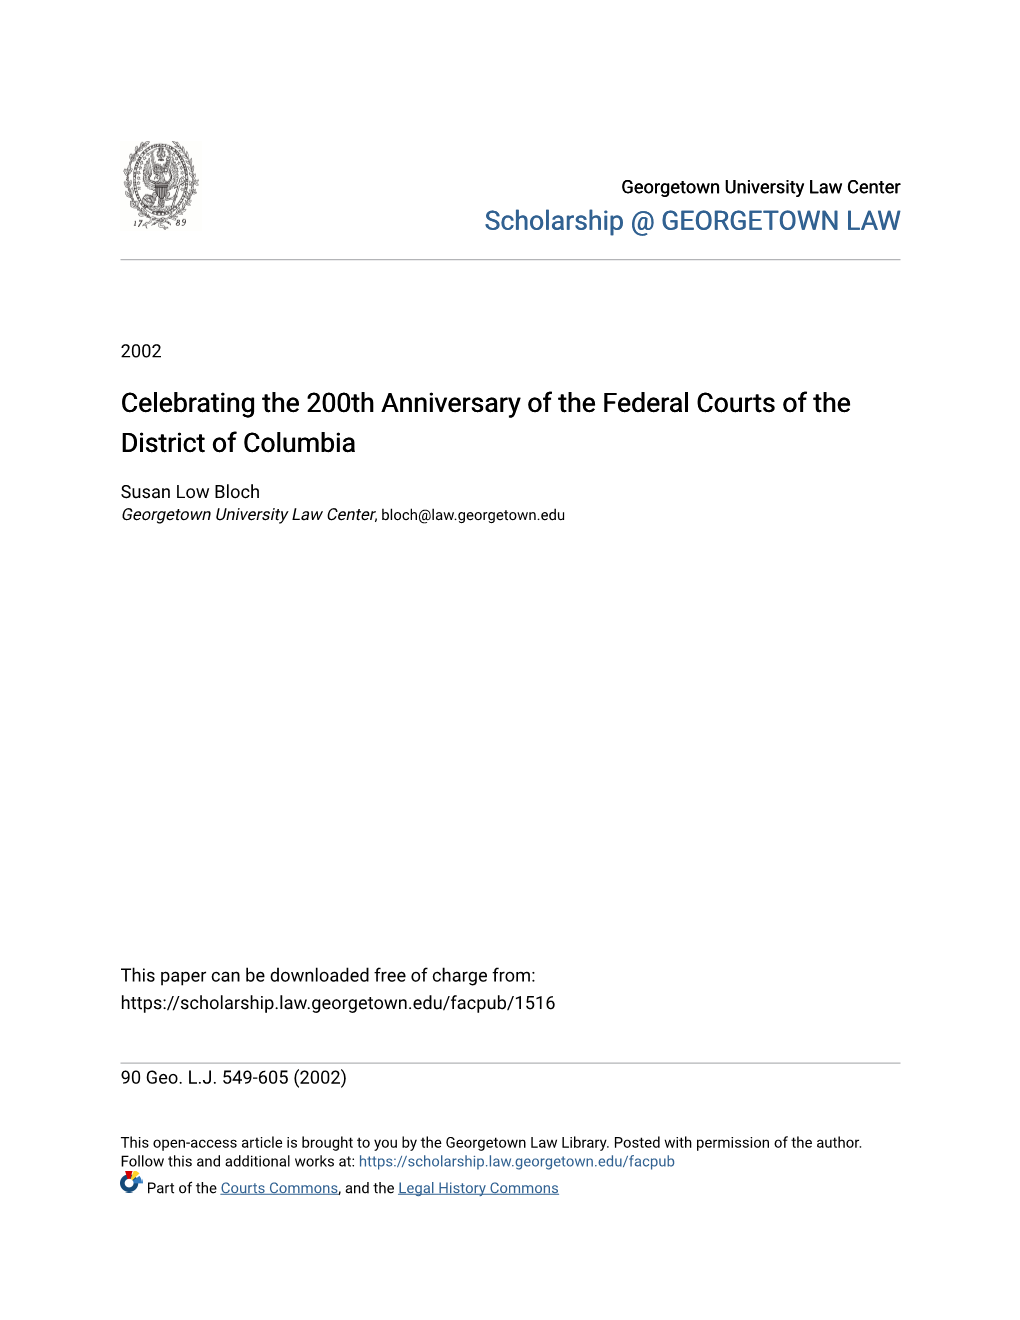 Celebrating the 200Th Anniversary of the Federal Courts of the District of Columbia